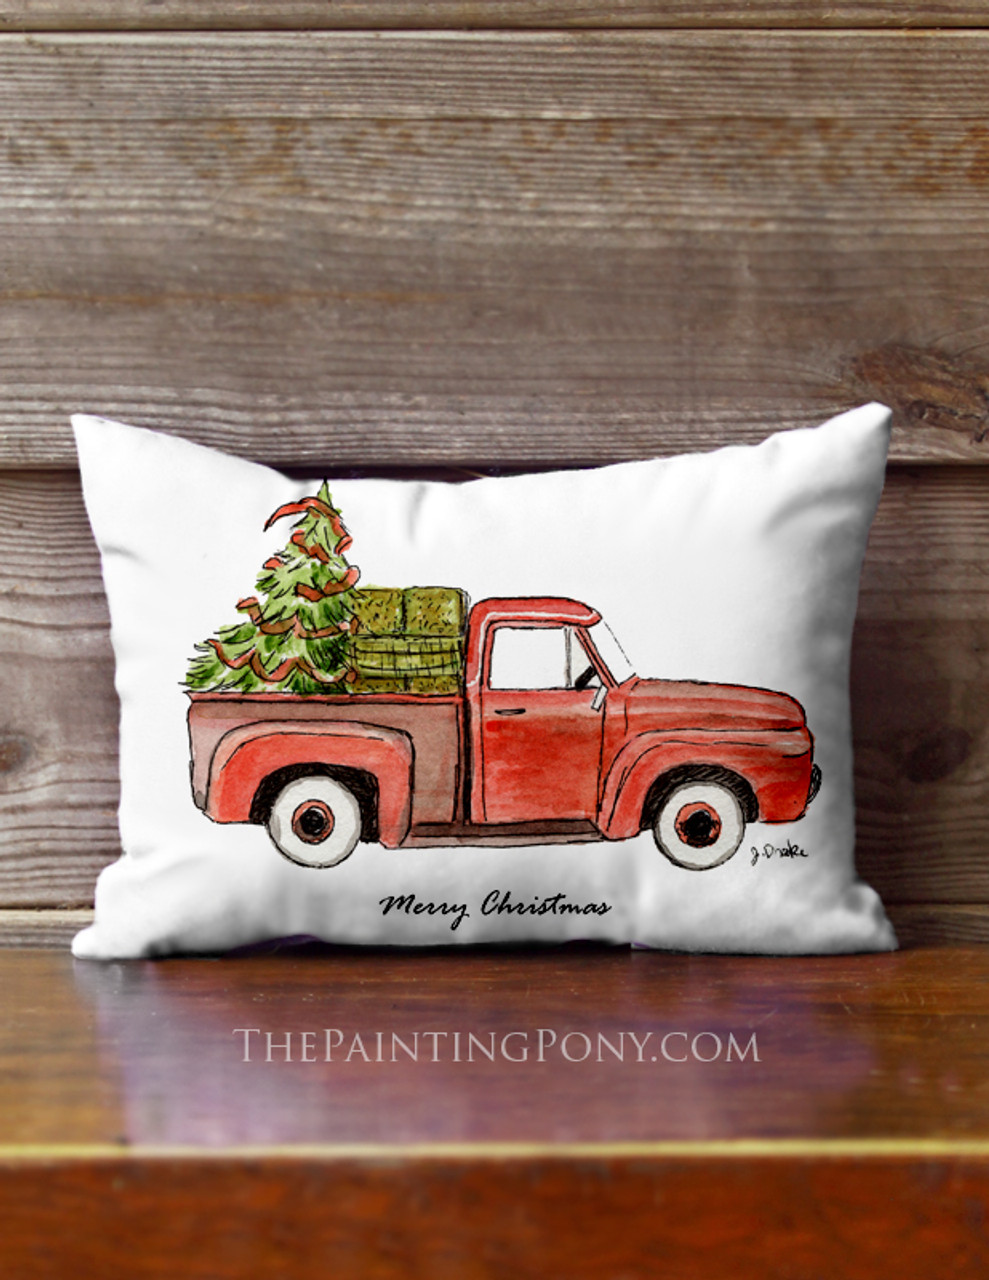 https://cdn11.bigcommerce.com/s-dthur0g/images/stencil/1280x1280/products/3658/16474/old_red_Farm_Truck_Christmas_small_accent_pillow__68093.1603808425.jpg?c=2